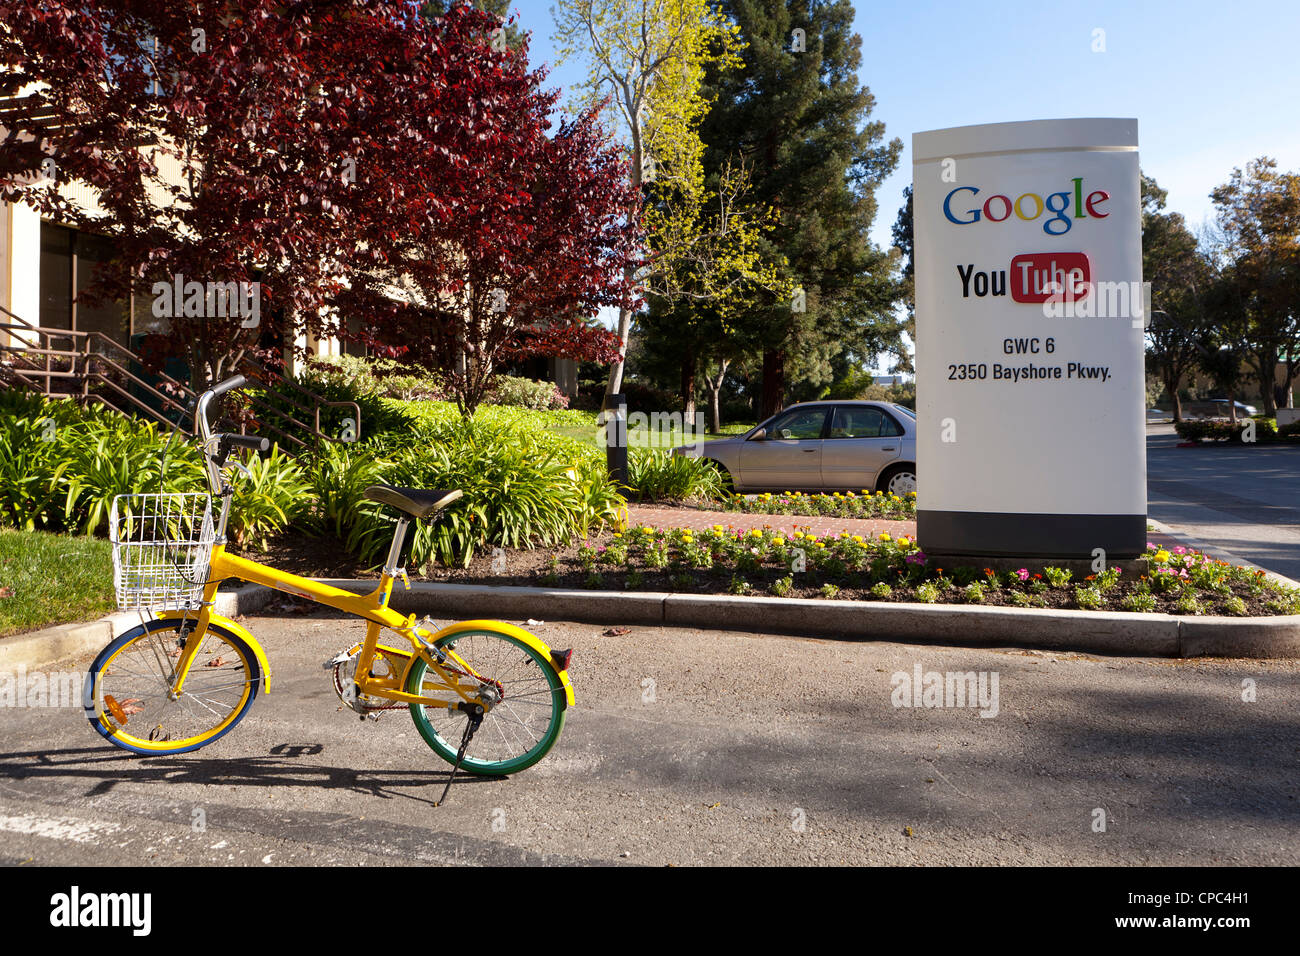 Google YouTube headquarters sign and bicycle - Mountain View, California USA Stock Photo